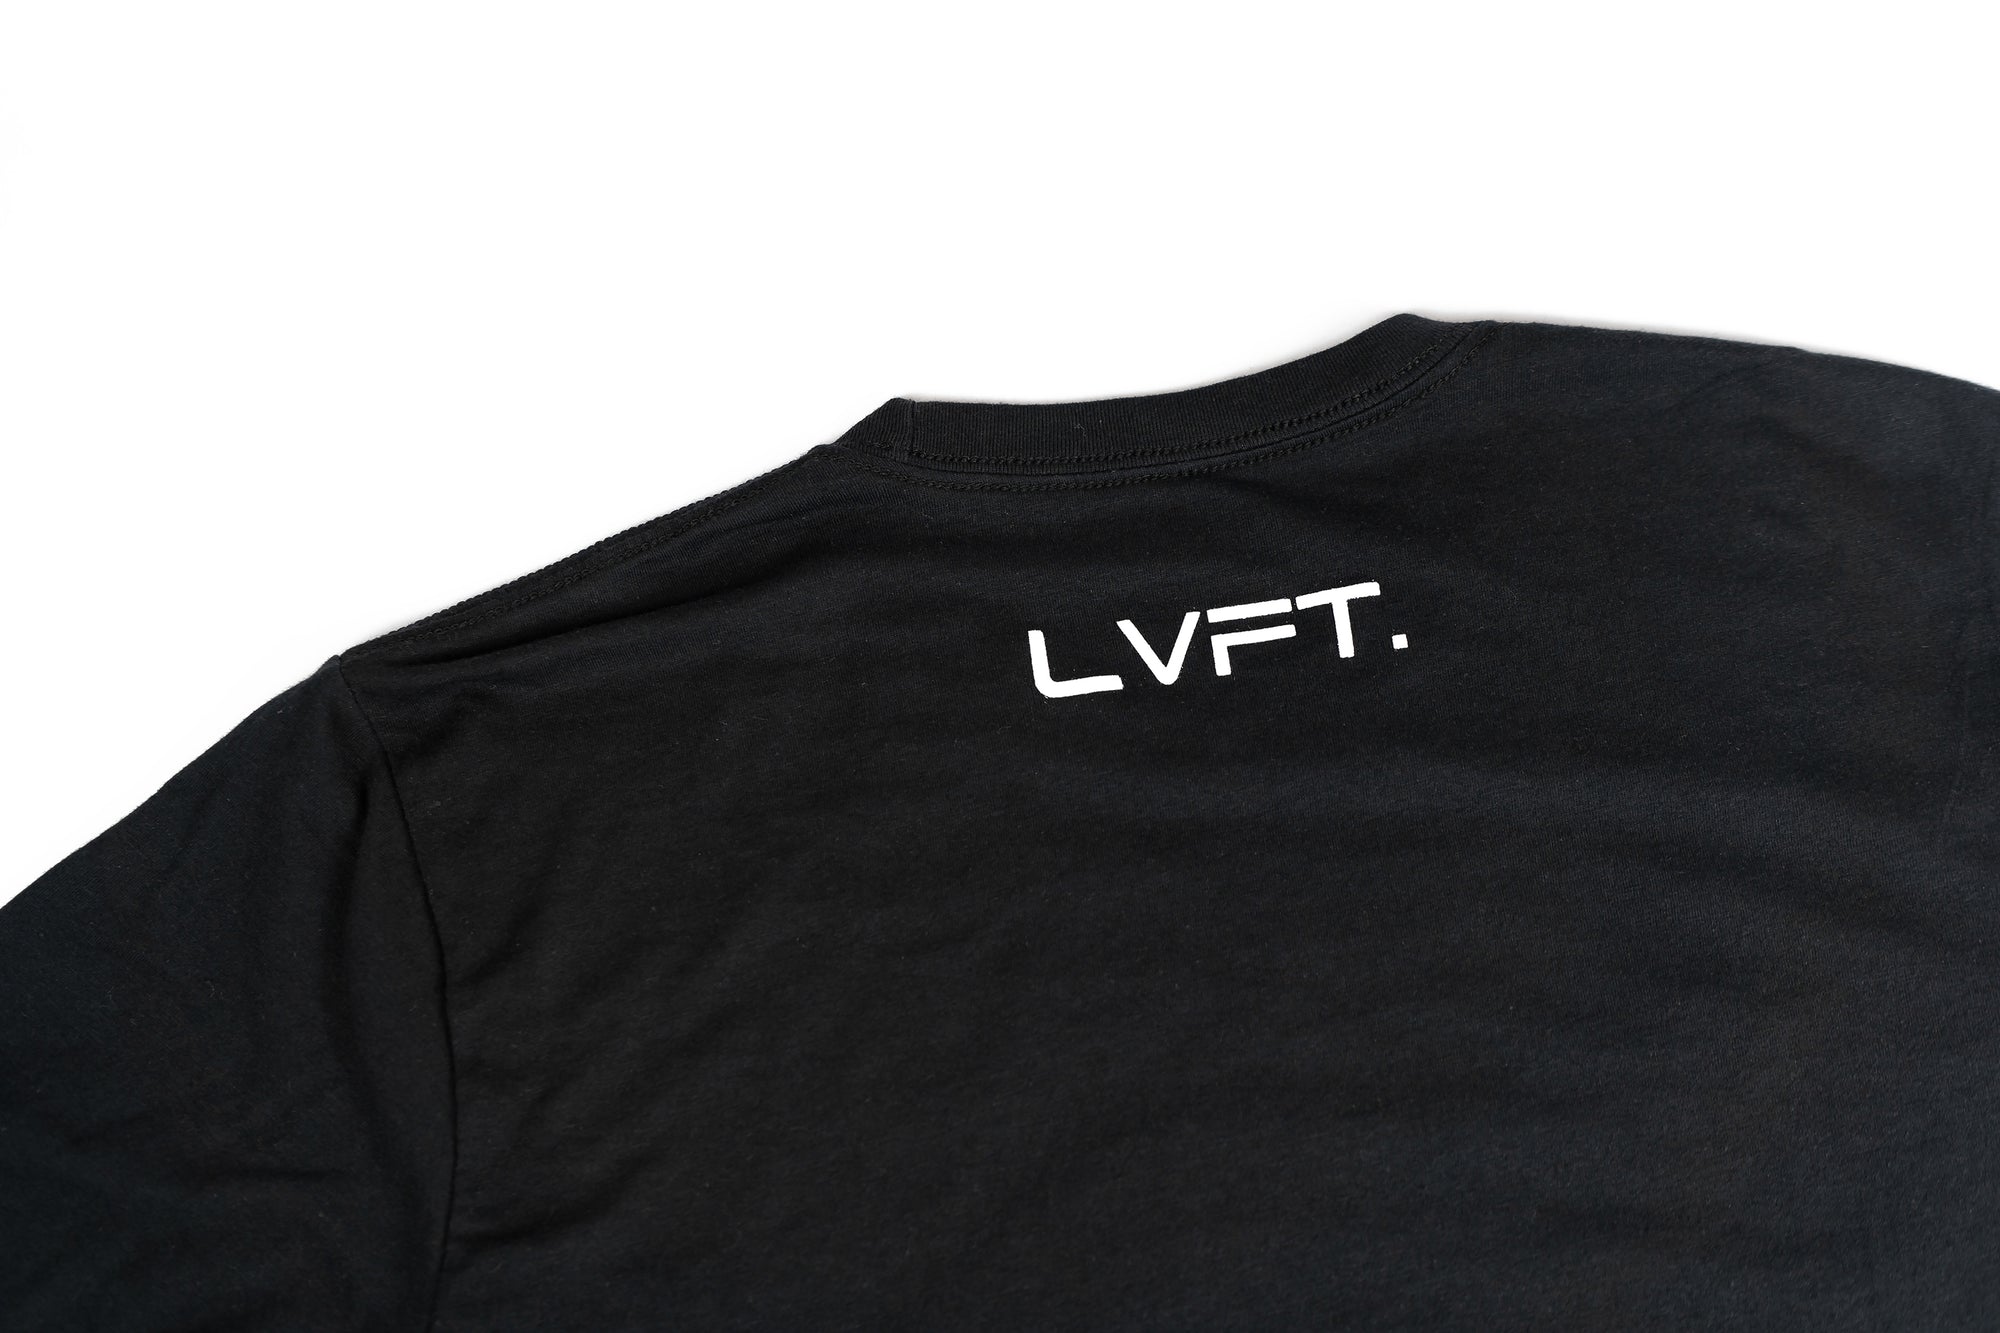 LVFT Live Fit Jersey Men's S Athletic Tank Top Mesh Jersey Shirt Black Lot  Of 2